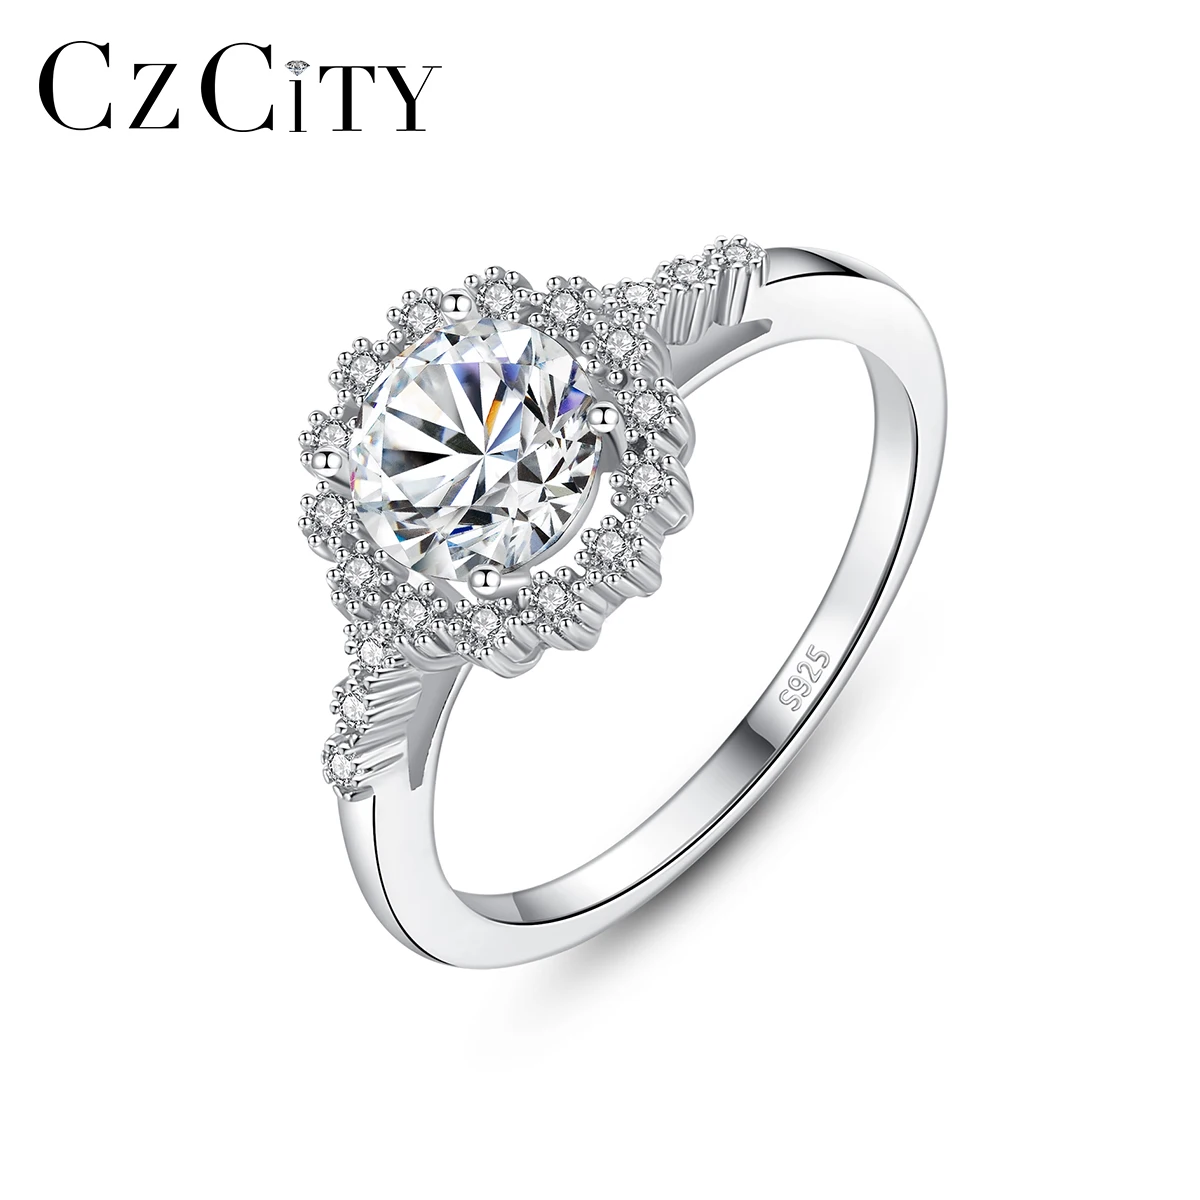 

CZCITY Shining Luxury Jewelry 925 Sterling Silver Gemstone Stone One Carat Moissanite Flower Shaped Rings